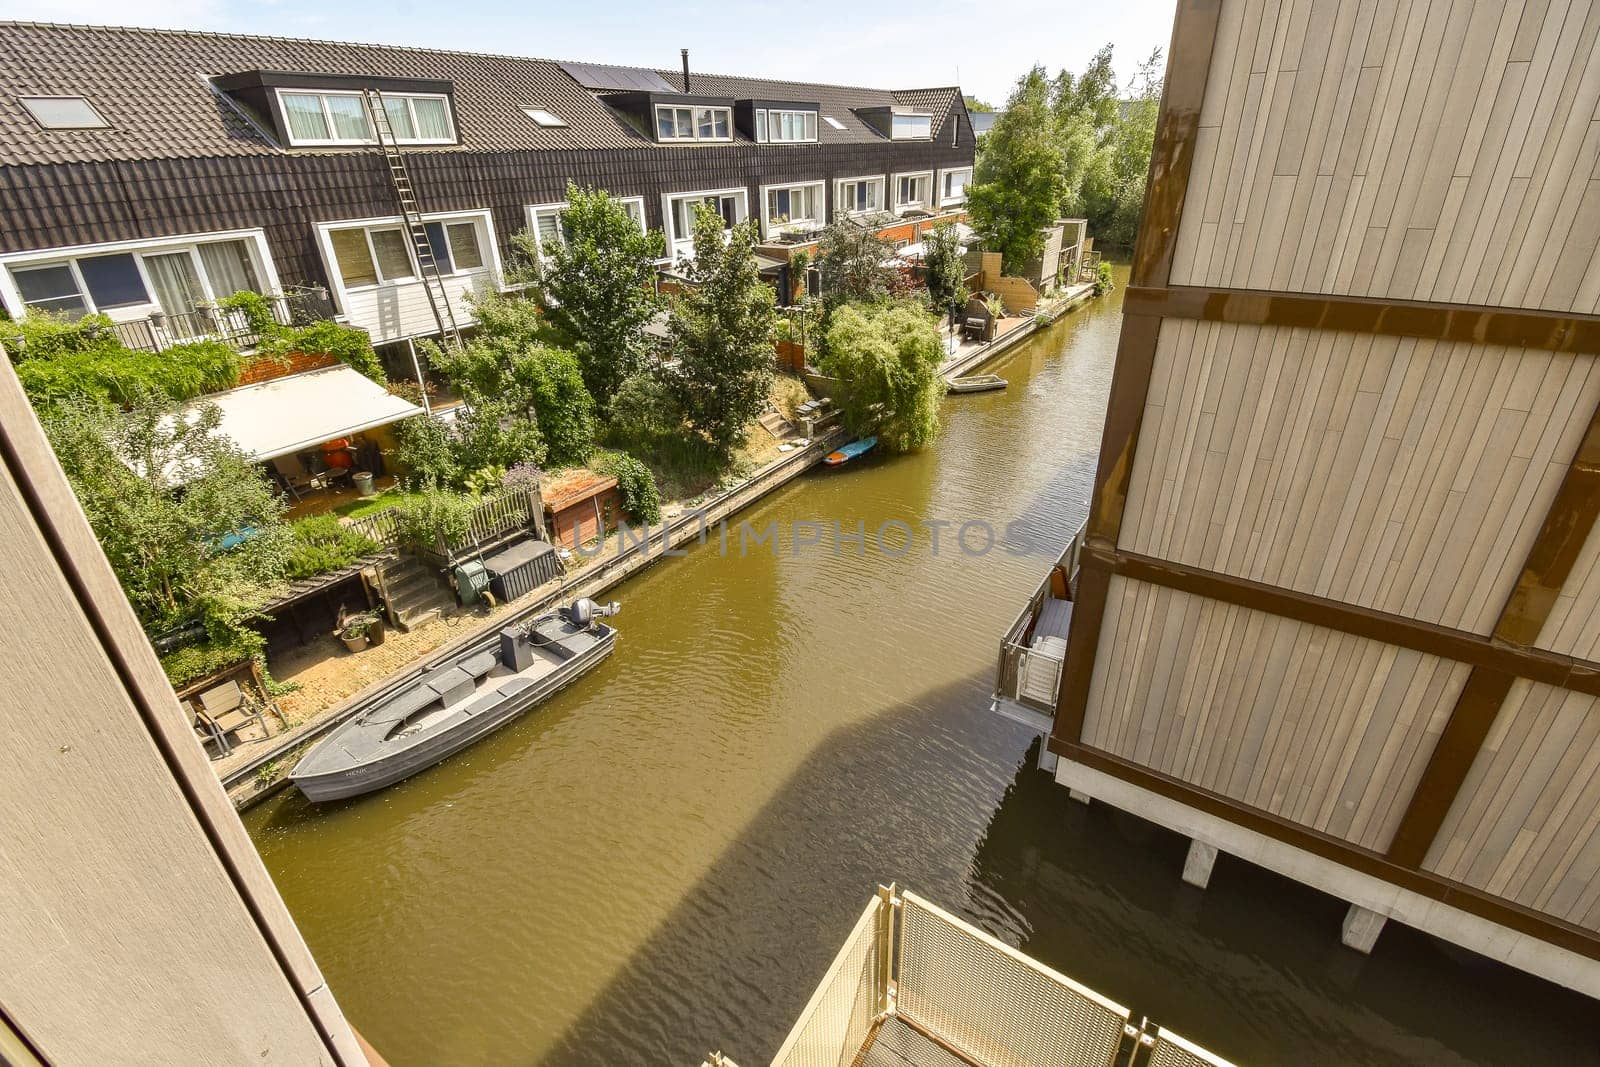 a canal with houses in the background and boats parked on the riverbanks, as seen from an apartment balcony